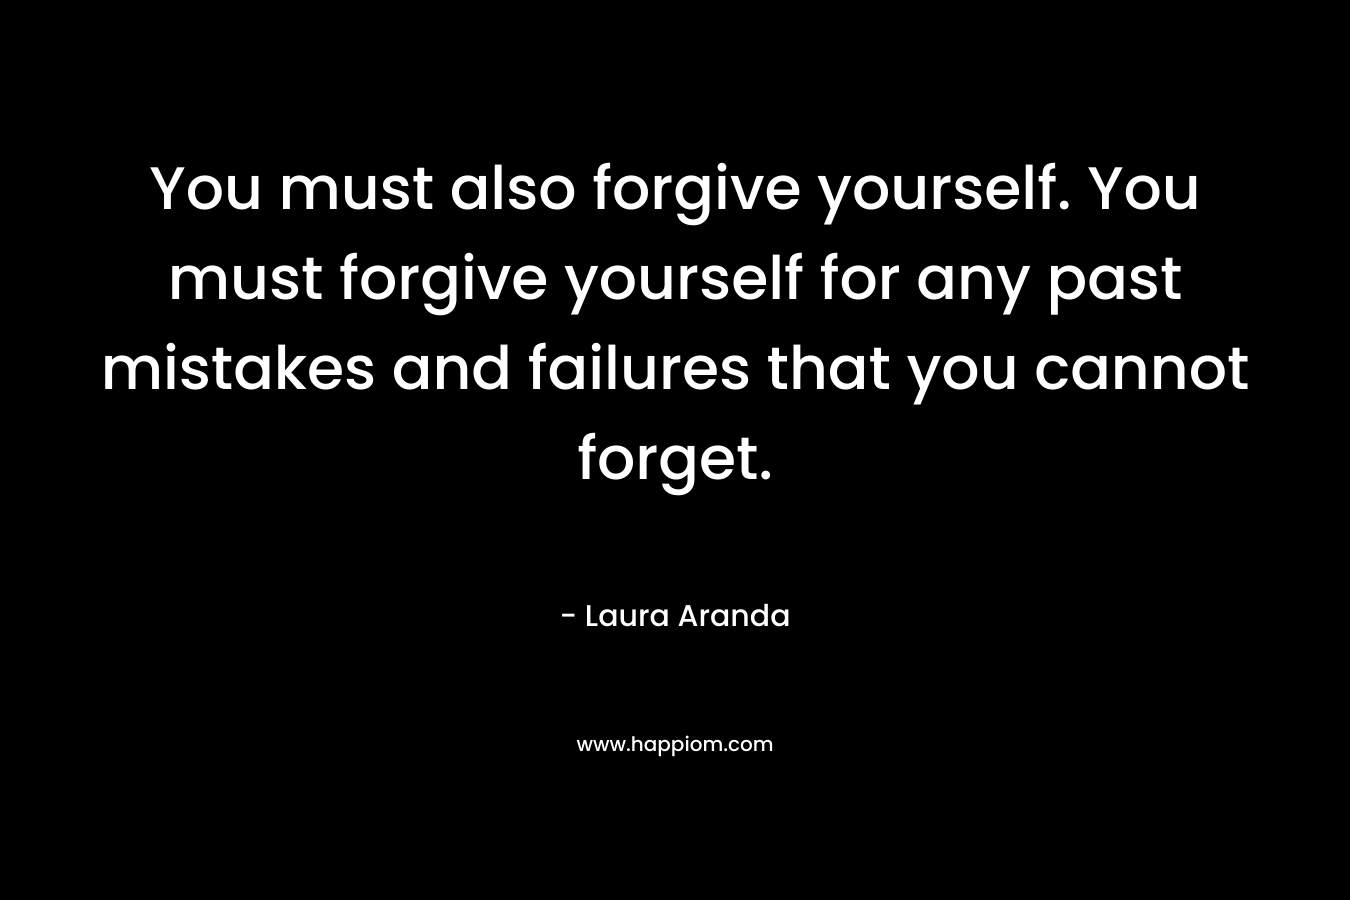 You must also forgive yourself. You must forgive yourself for any past mistakes and failures that you cannot forget.